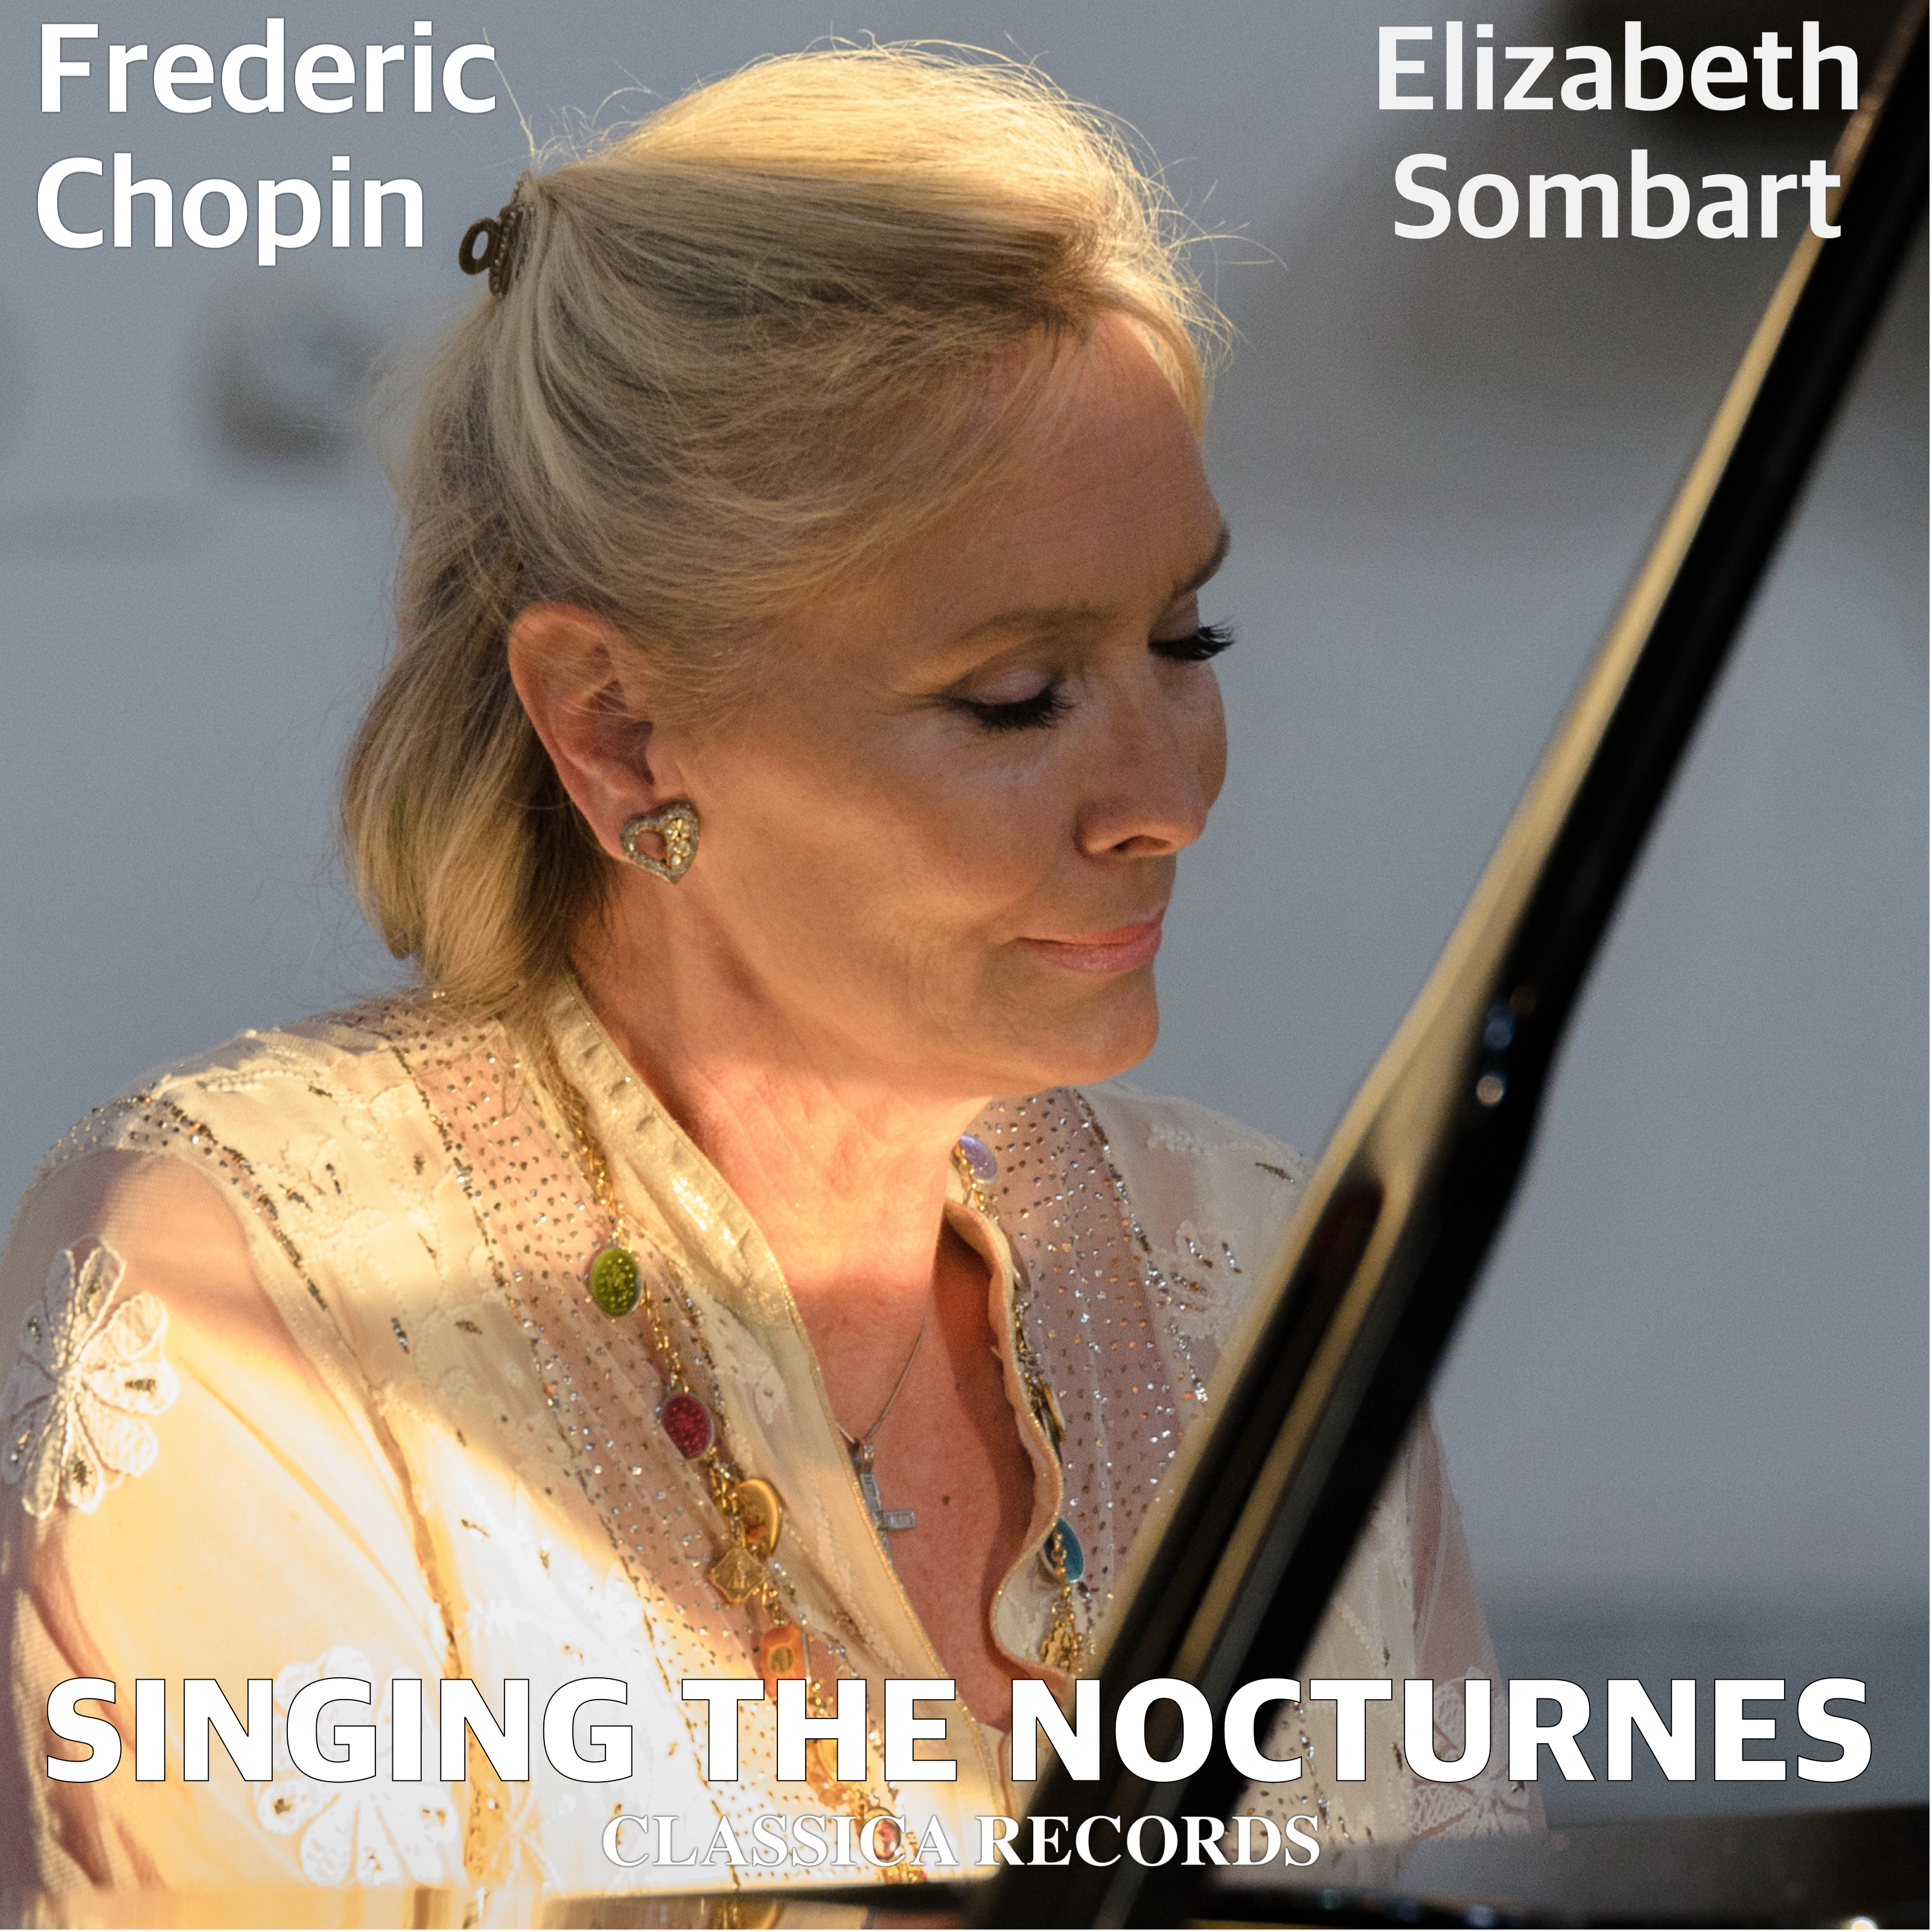 Singing the Nocturnes (Classica Records), Elizabeth Sombart's new Album dedicated to Chopin's music opens the new year with absolute Joy.